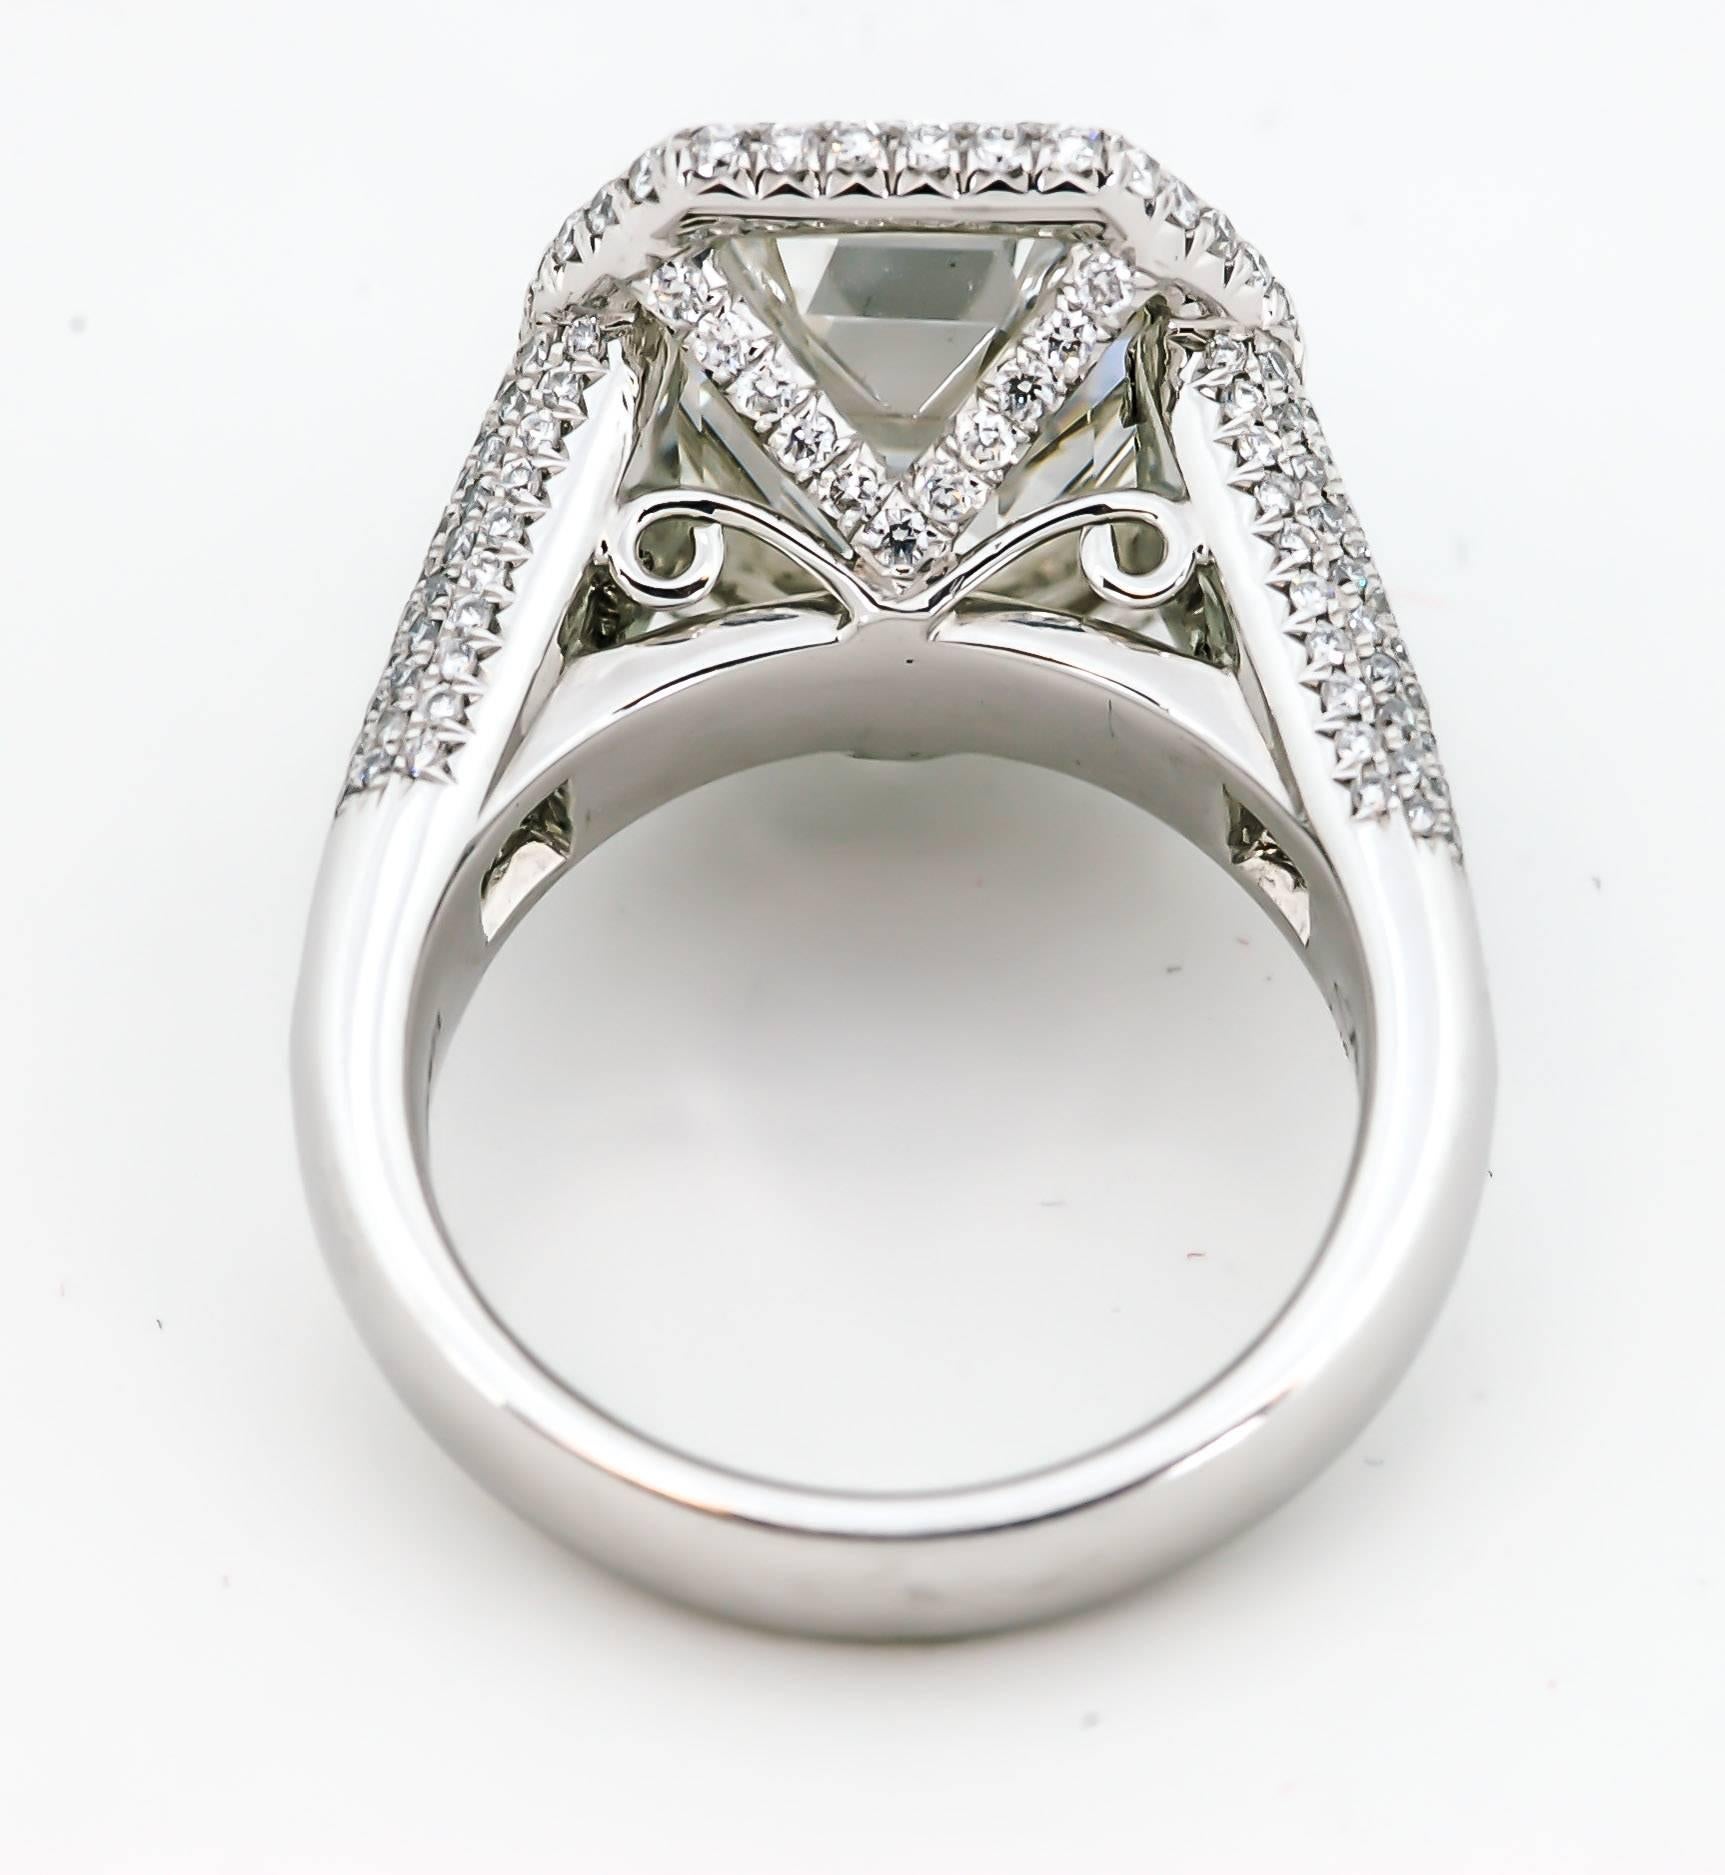 This ring is expertly crafted to sparkle and stun with its 7.25 carat octagonal emerald cut diamond (clarity VS1 color H; GIA report 11317831). Eight trapezoid cut diamonds weighing 1.65 carats (clarity VS color G) shine from their place in the